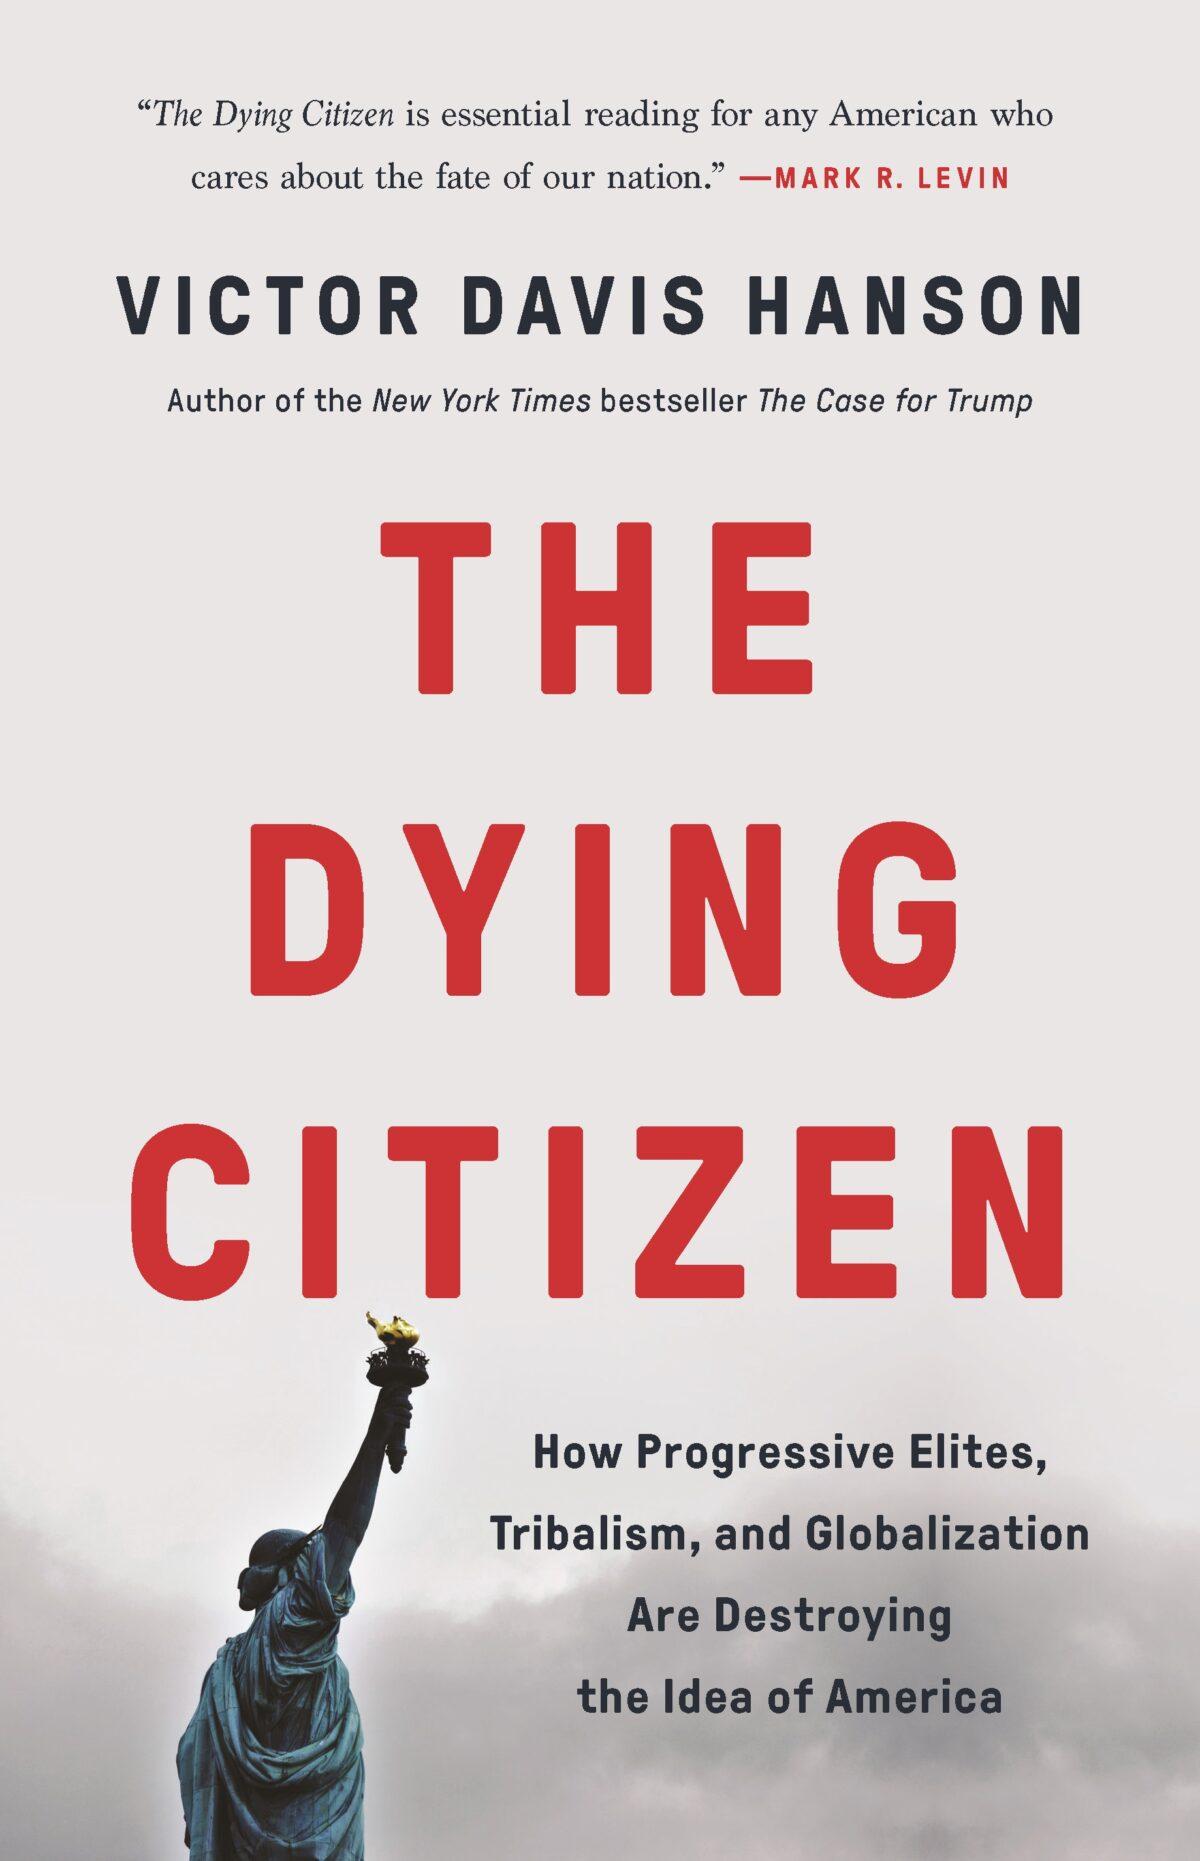 Cover of "The Dying Citizen" by Victor Davis Hanson. (Basic Books)